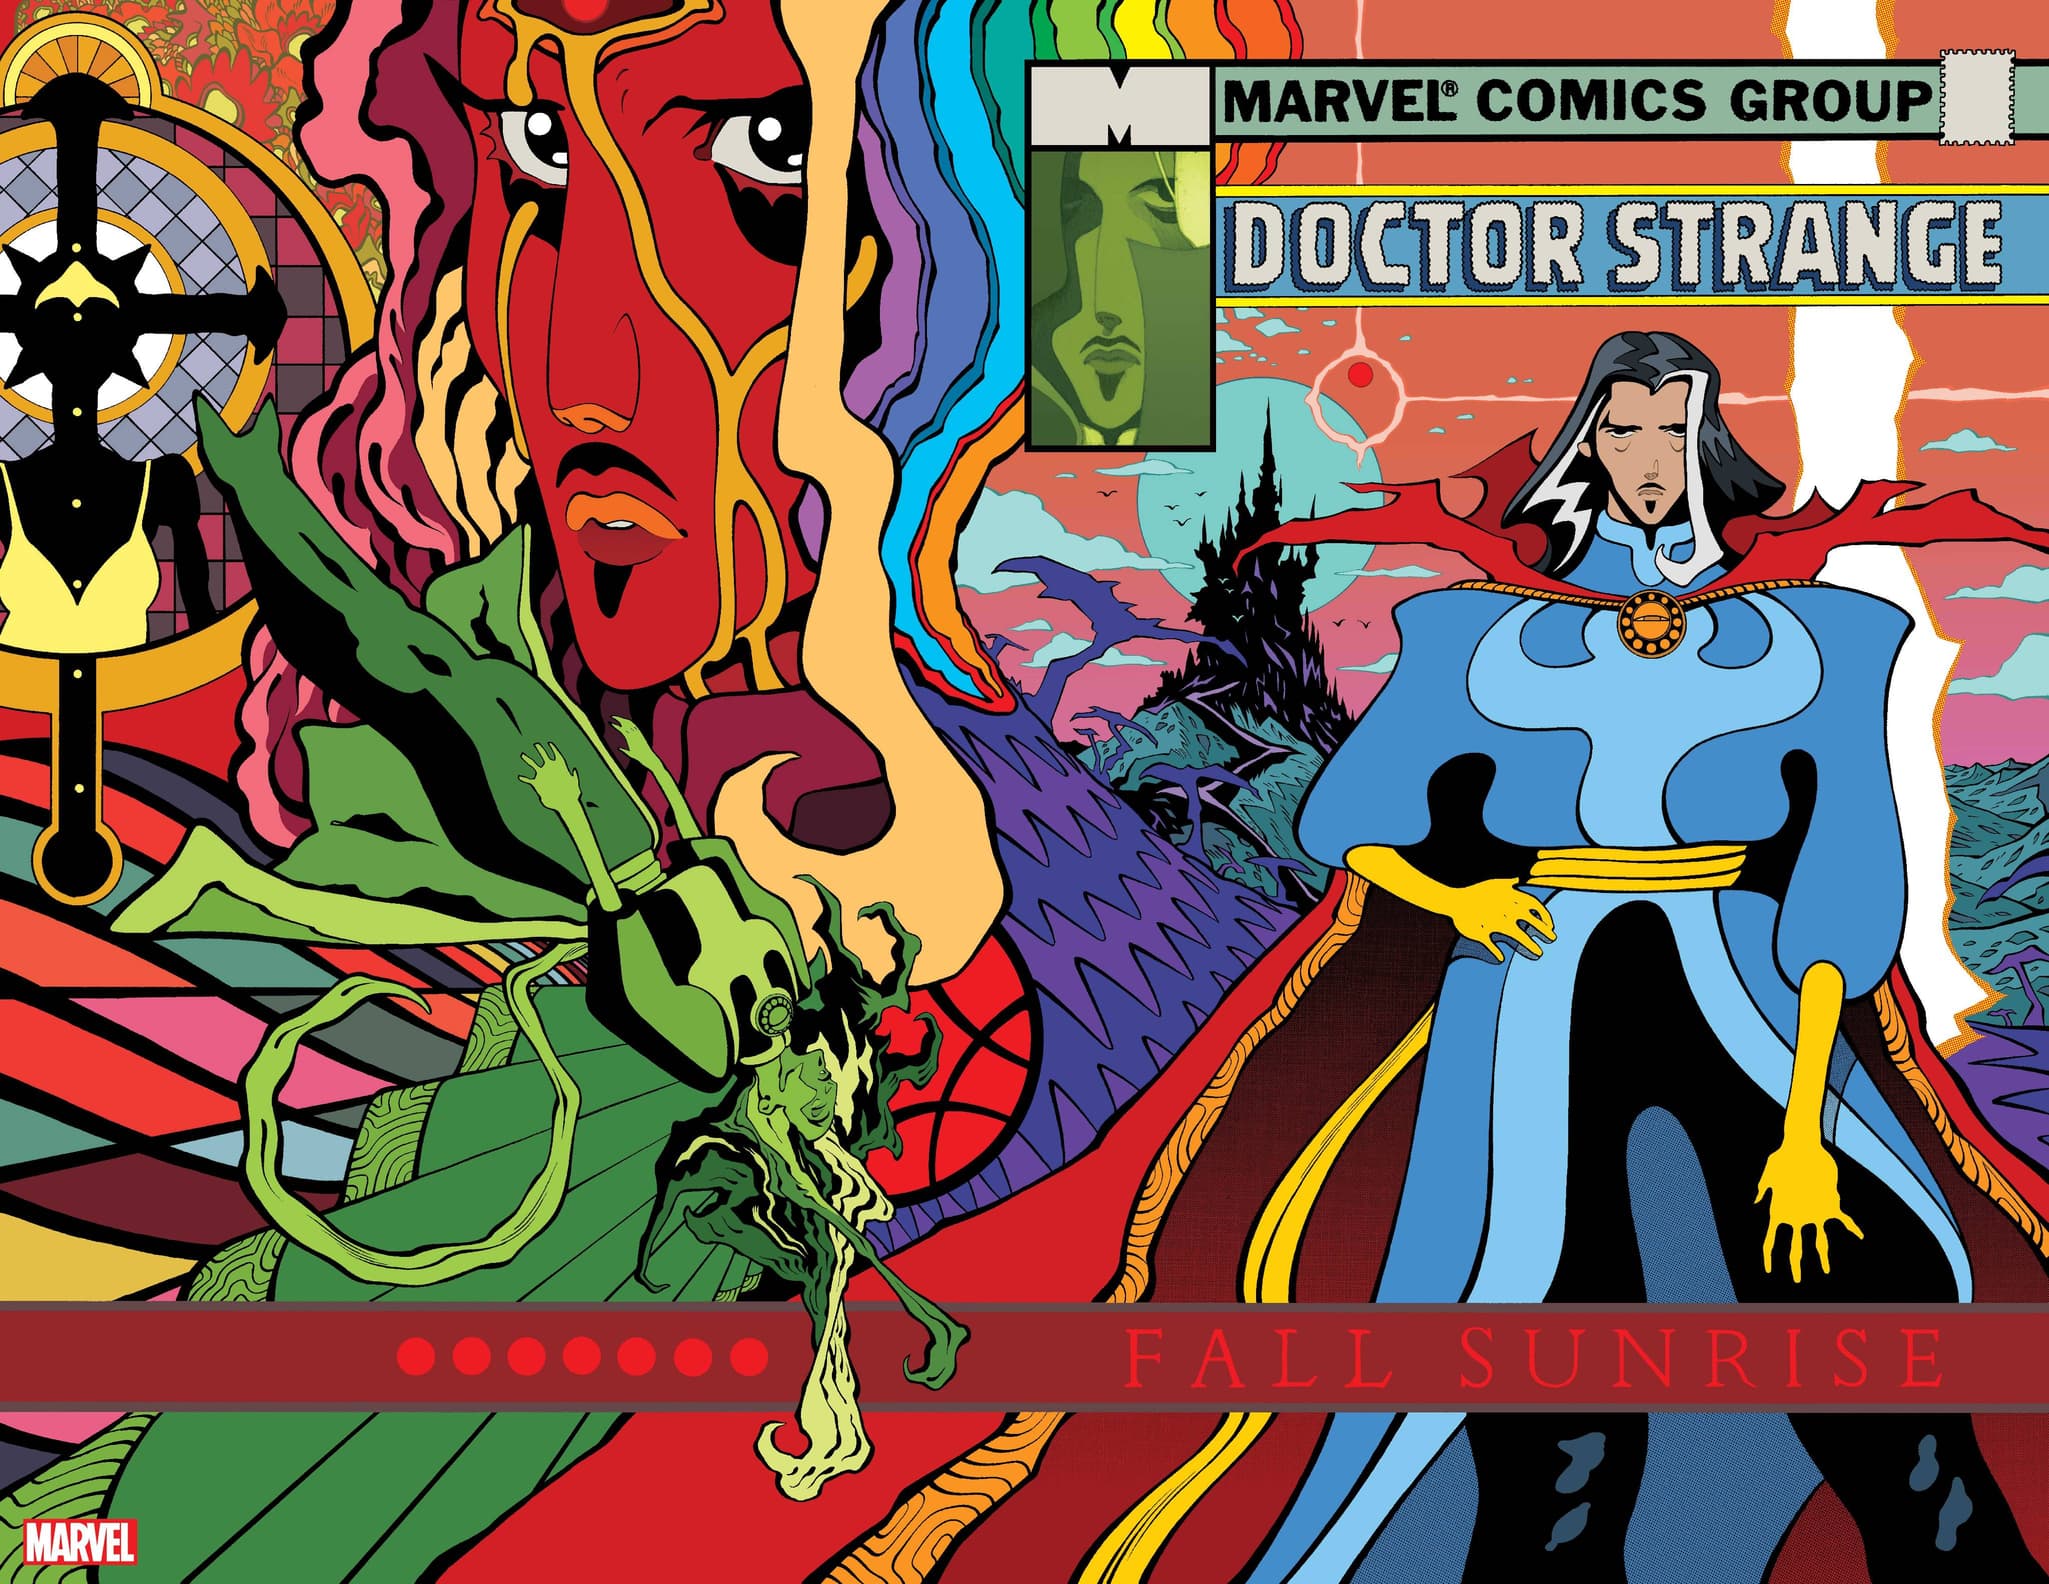 DOCTOR STRANGE: FALL SUNRISE #1 Wraparound Cover by Tradd Moore